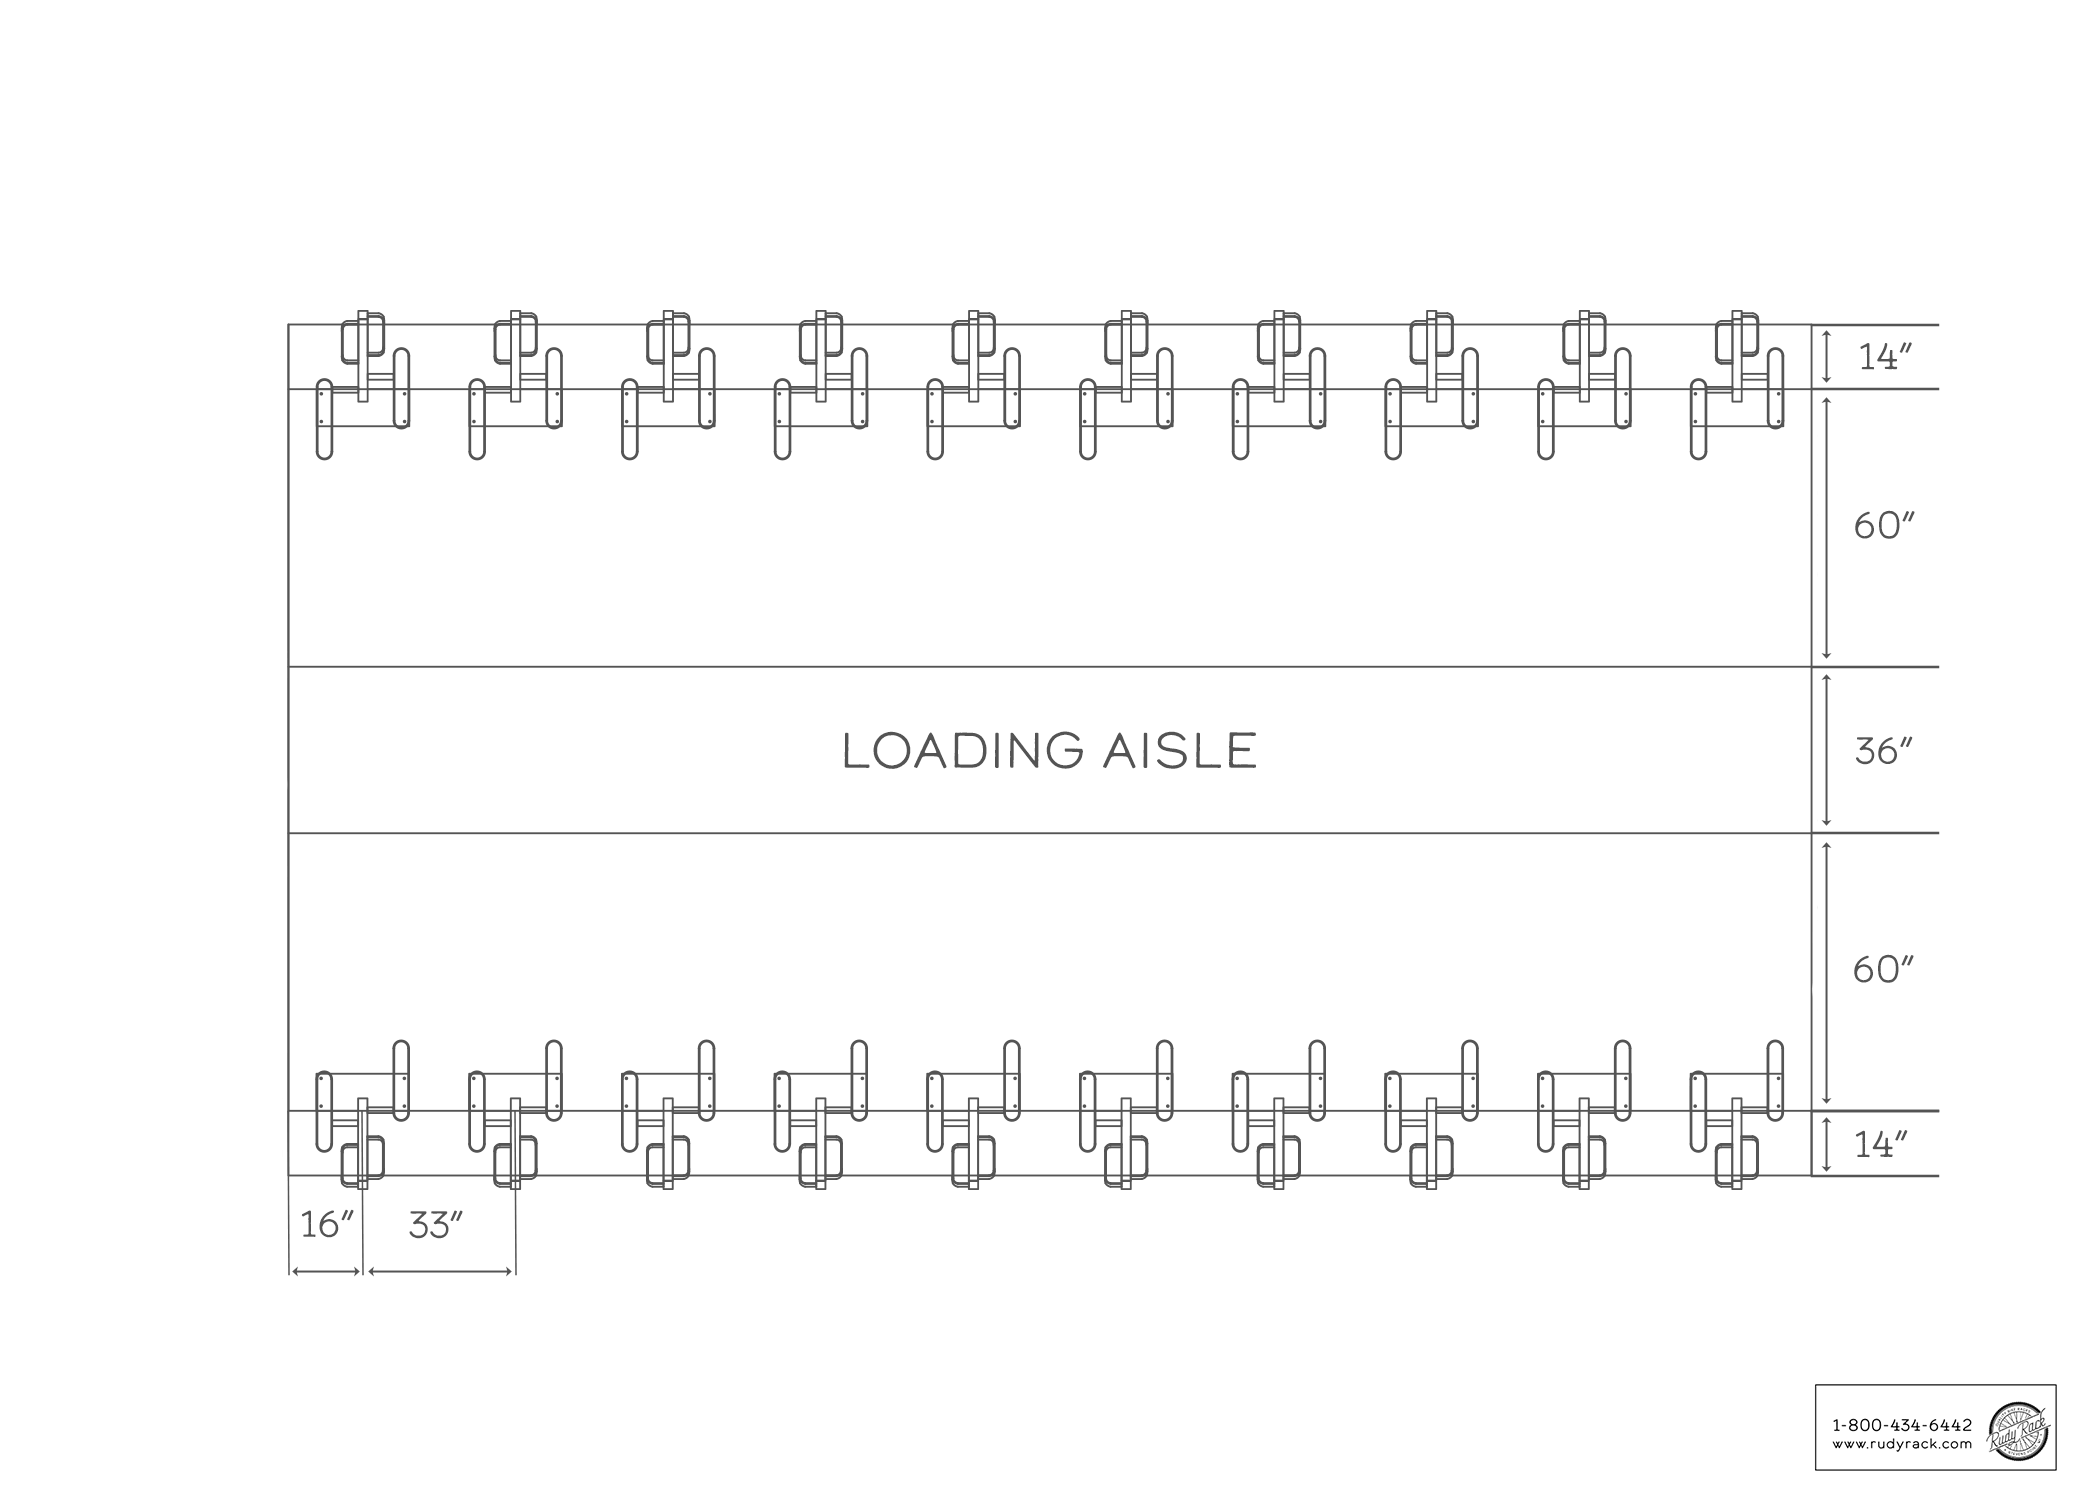 Double Bike Stable Layout